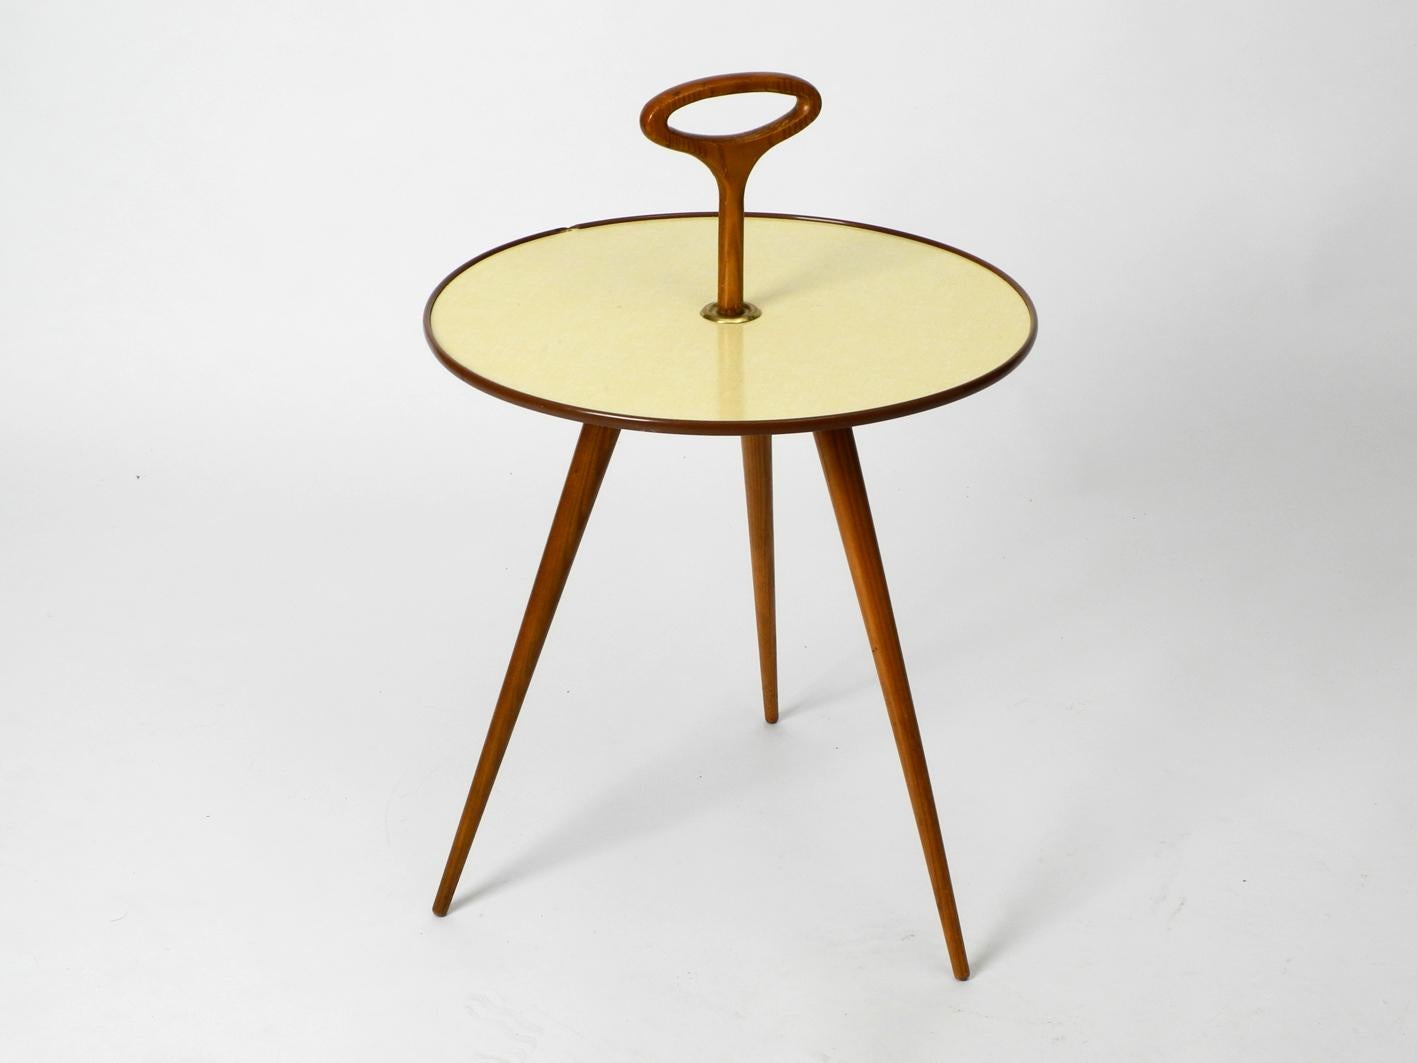 Very rare Mid-Century Modern round tripod table with handle top. Made in Germany. Beautiful very unusual design in original condition. Round beige plate covered with formica.
Frame is made of clear lacquered walnut.
Very good condition, there is